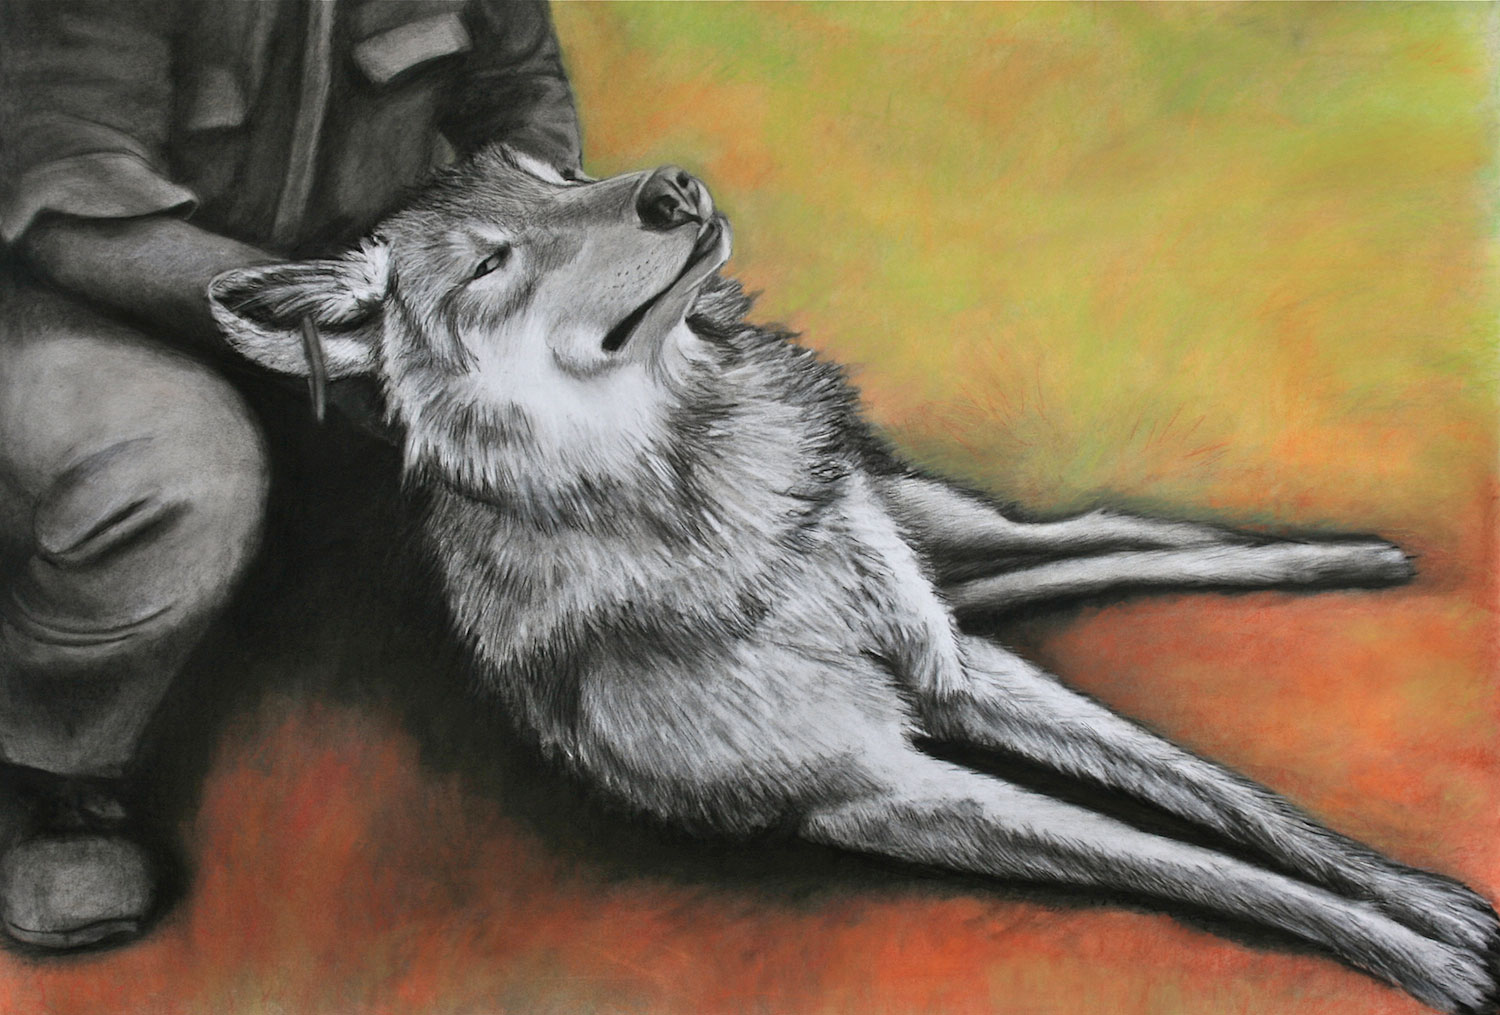 Jackie Skrzynski, Timber Wolf, Tagged, 2013. Charcoal and pastel, 35 x 50 in.